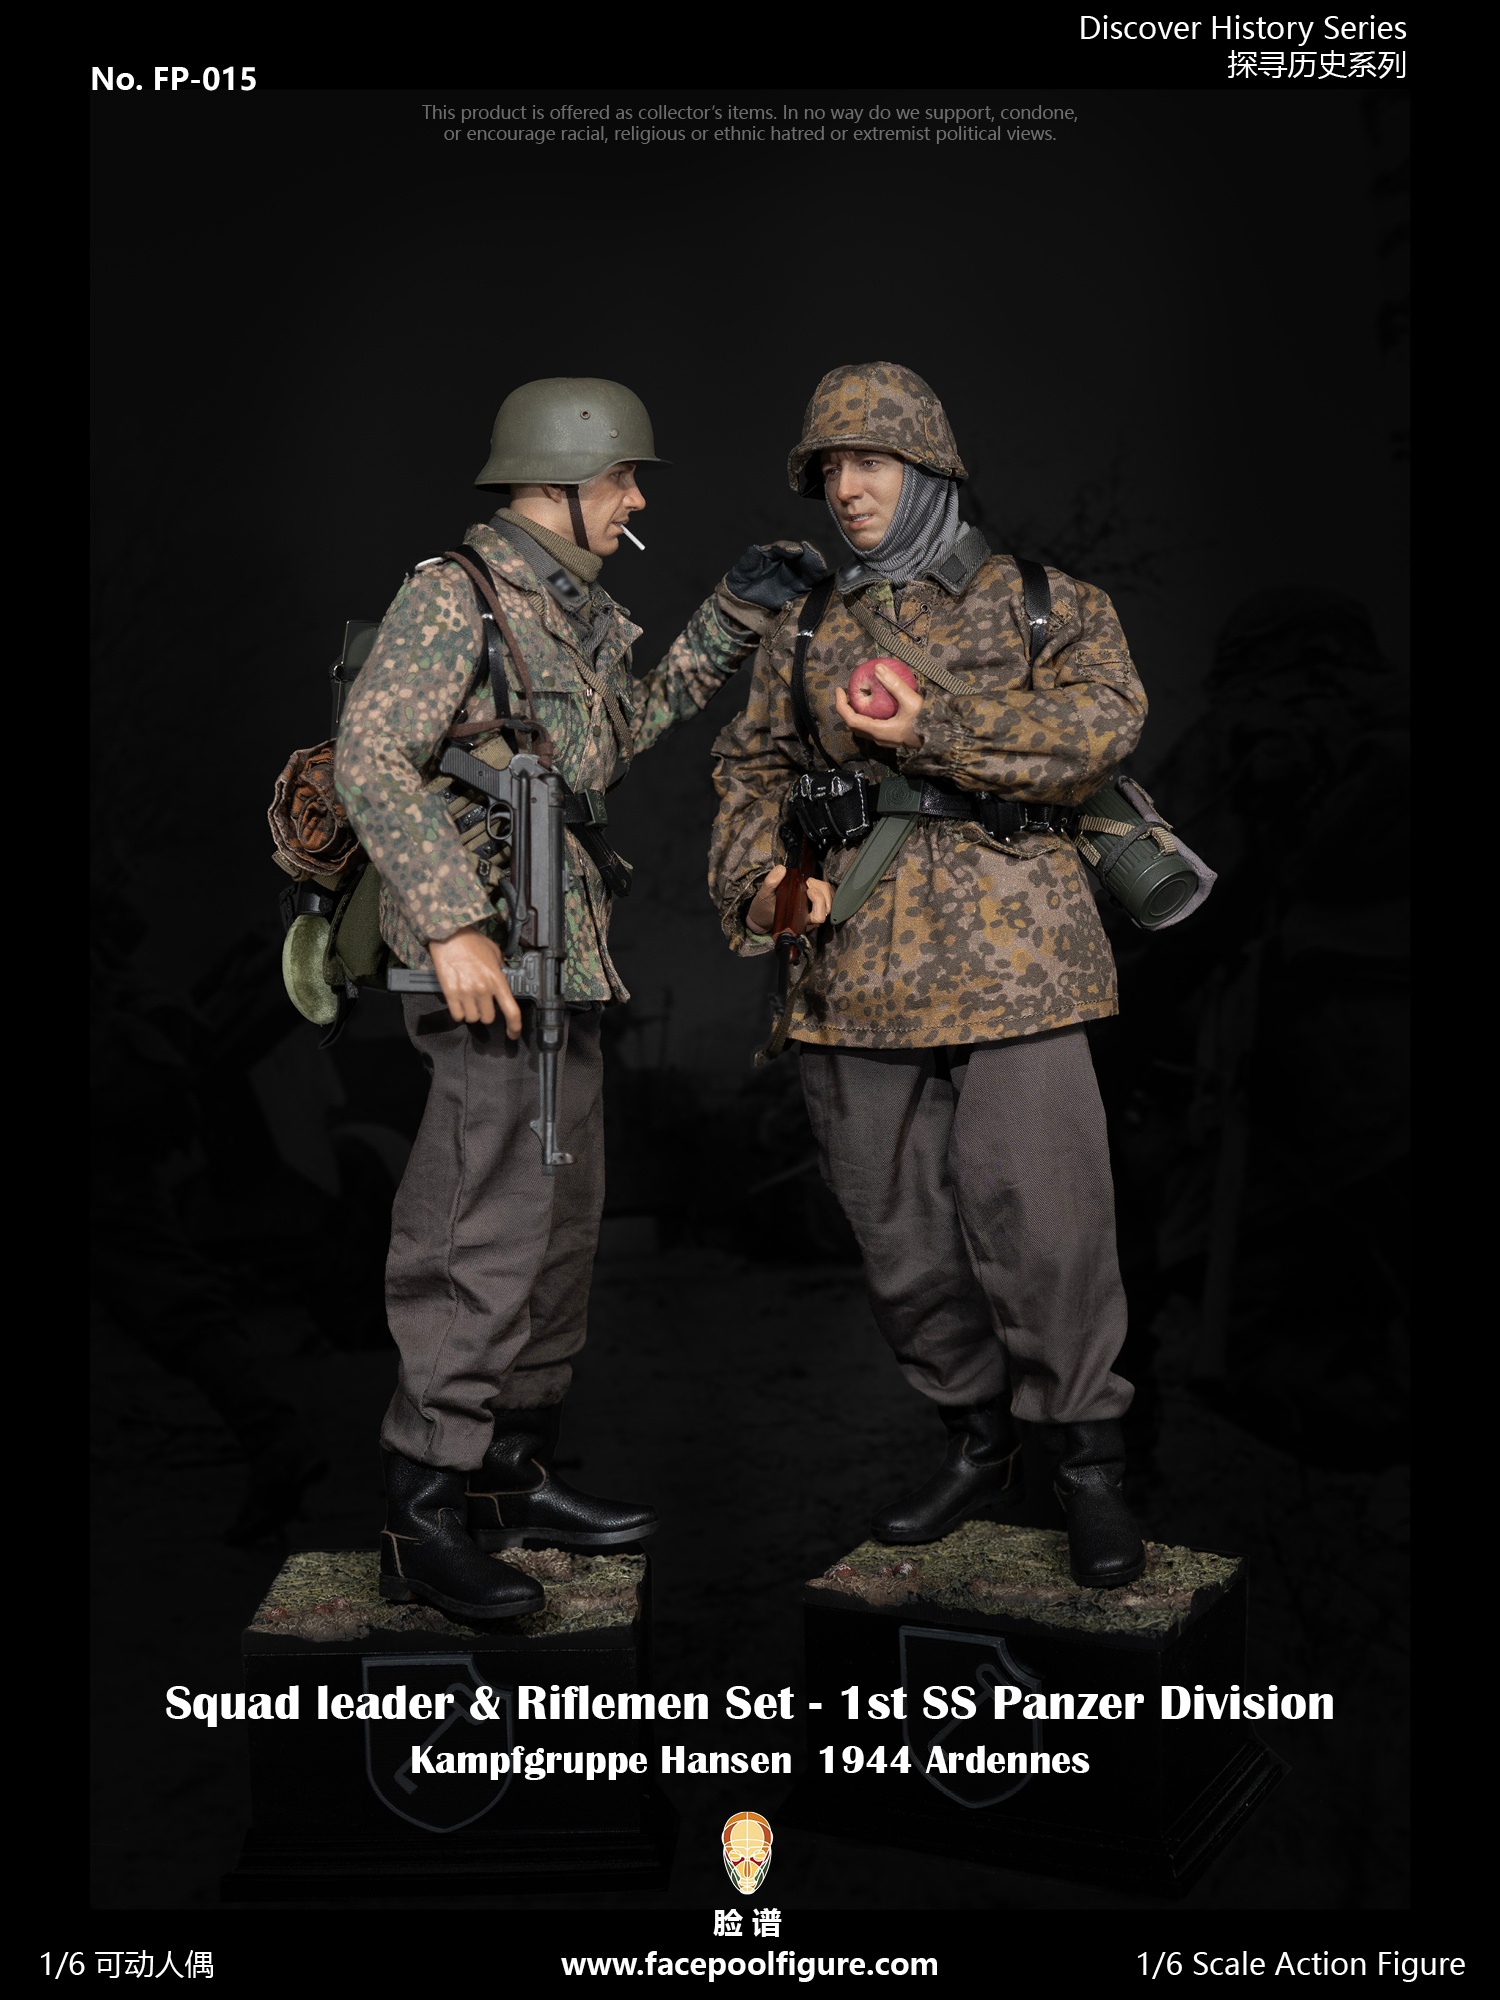 Facepoolfigures - NEW PRODUCT: FacePoolFigures - Exploring History Series – Ardennes Soldier Duo #FP015A/B/C 06104